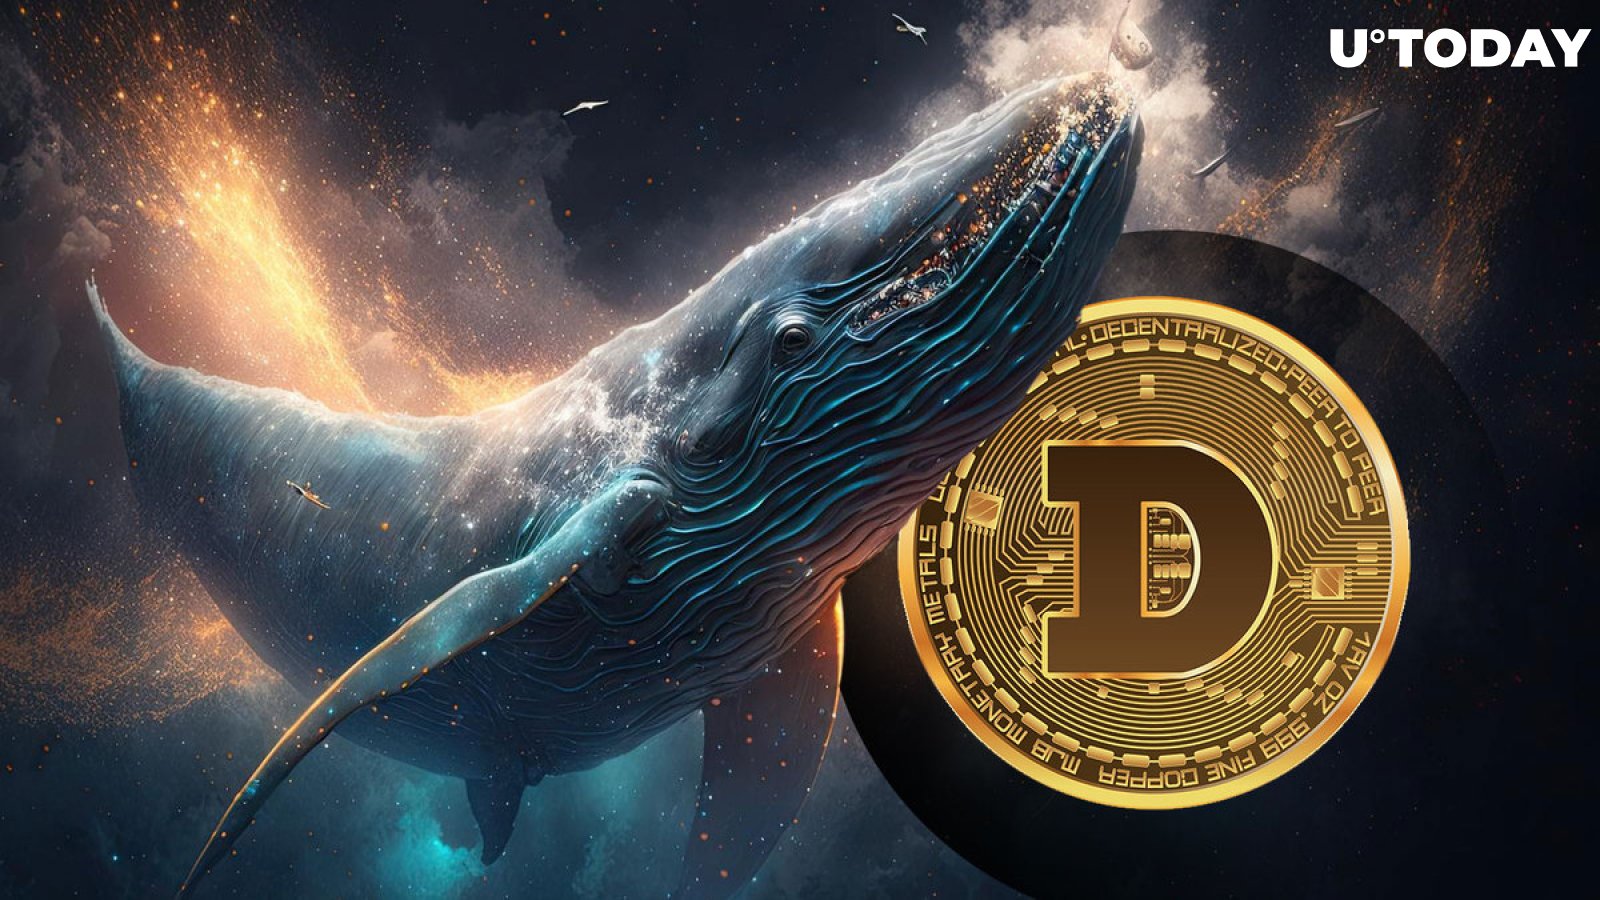 Satoshi-era DOGE whale returns after 10.2 years of inactivity